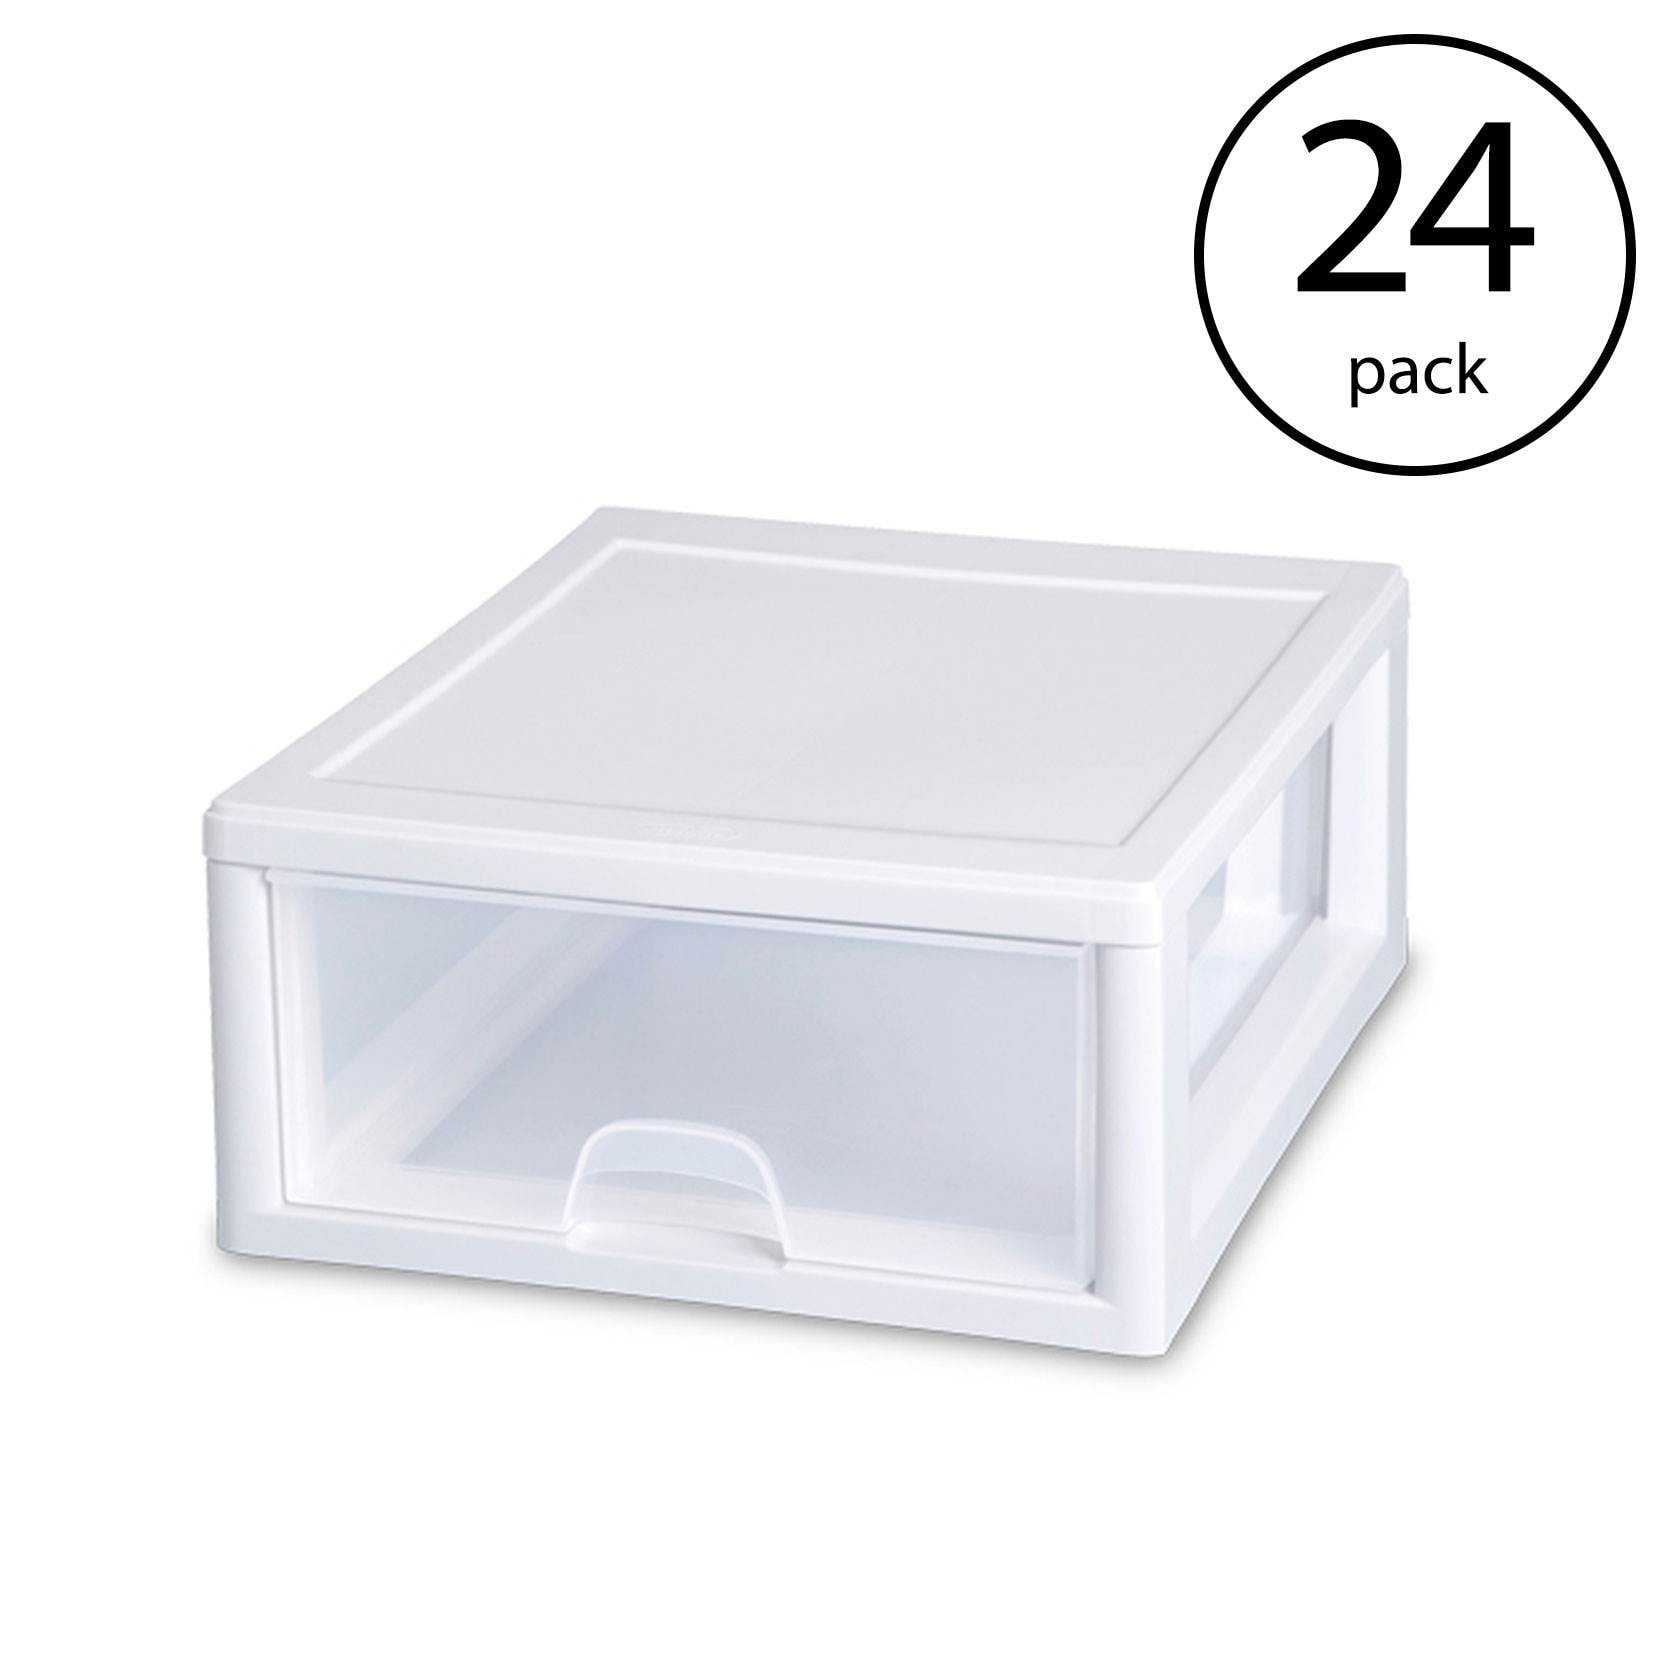 Sterilite 16 Quart Clear Plastic Stacking Storage Container Box (12 Pack)